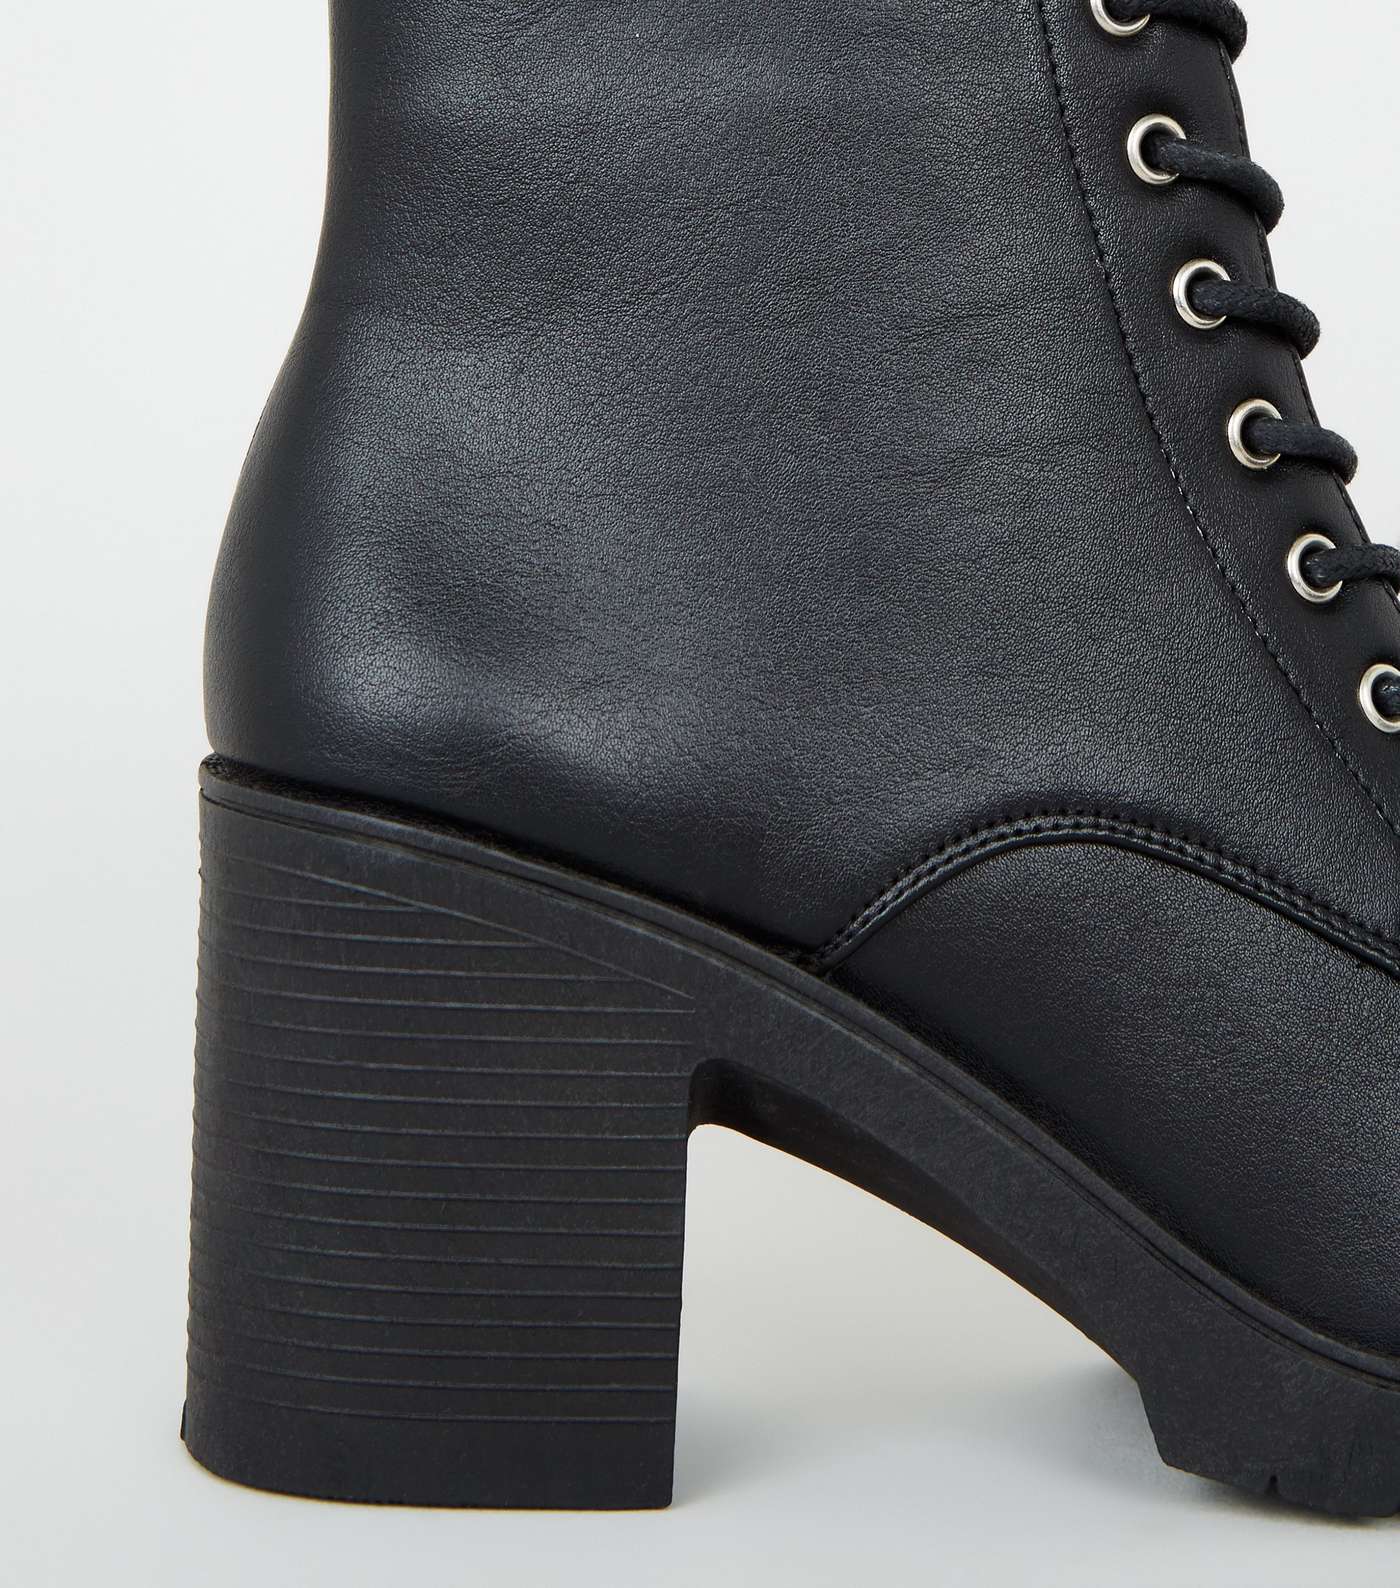 Black Leather-Look Lace Up Heeled Boots Image 4